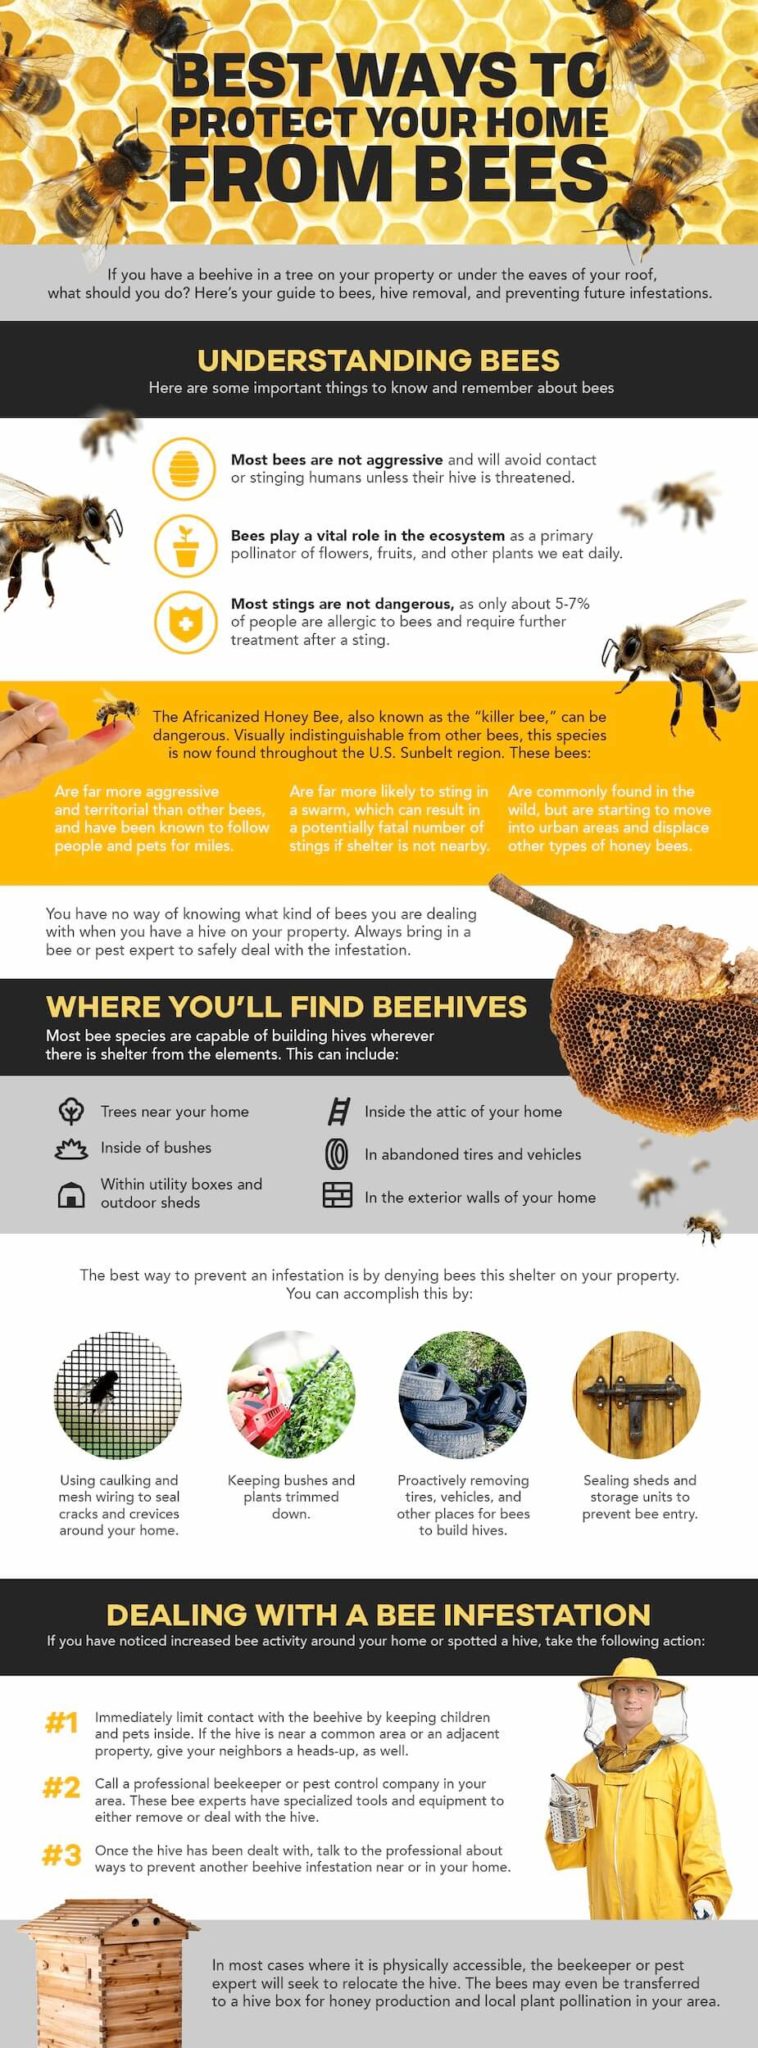 This infographic has everything you need to know about bees and beehives, as well as how you should deal with a hive near your home.